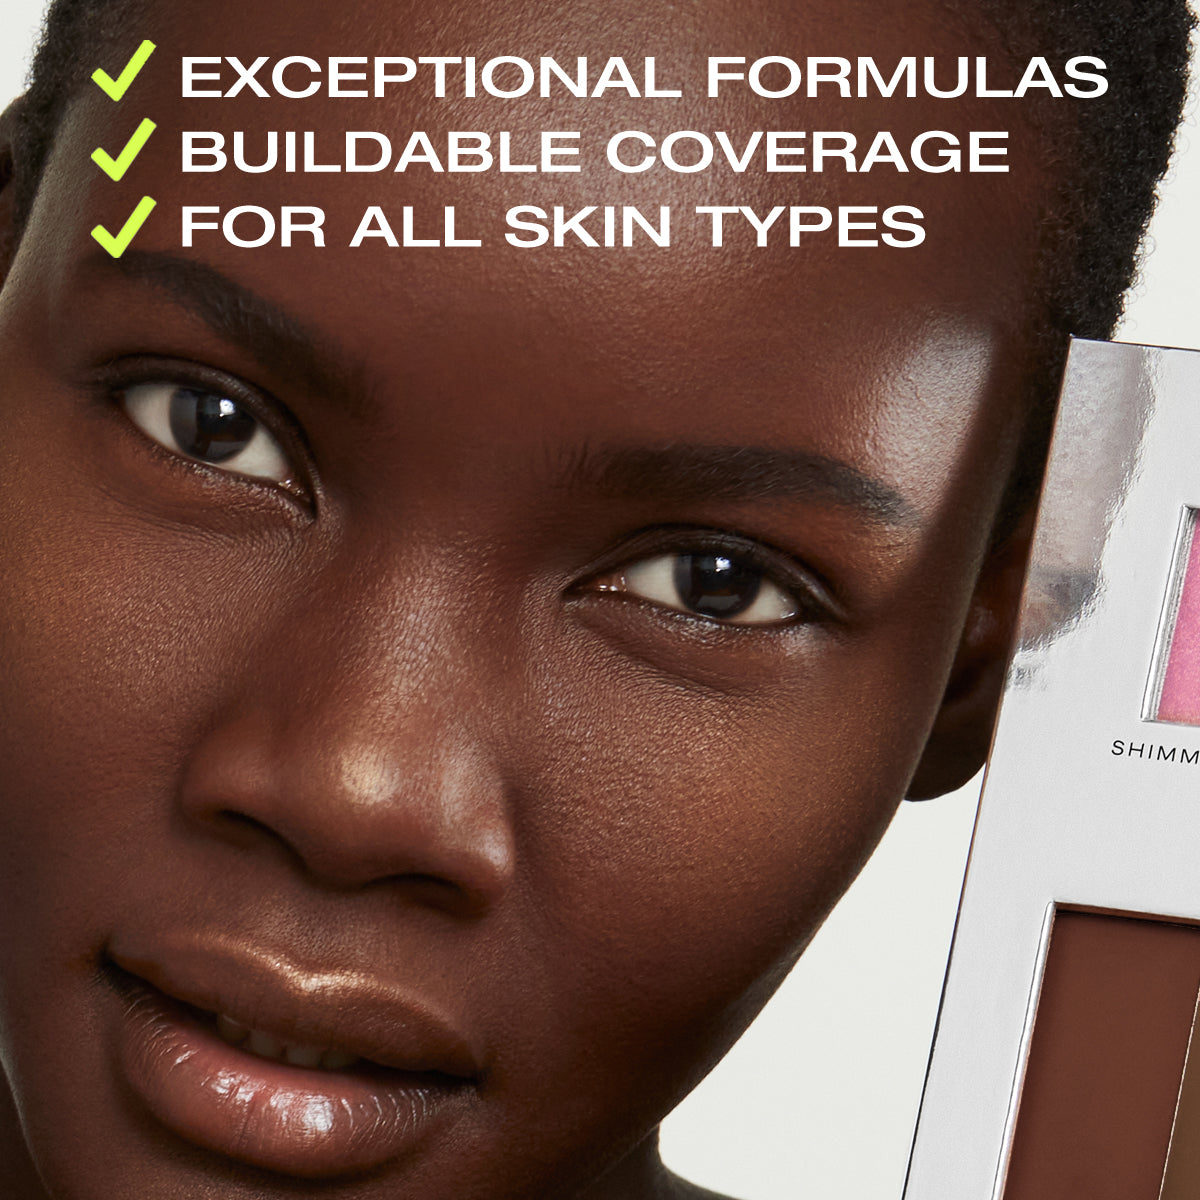 a photo of a beautiful woman with copy on top stating that the coverage in Fold Out Complexion is buildable, and the formulas are clean & good for all skin types